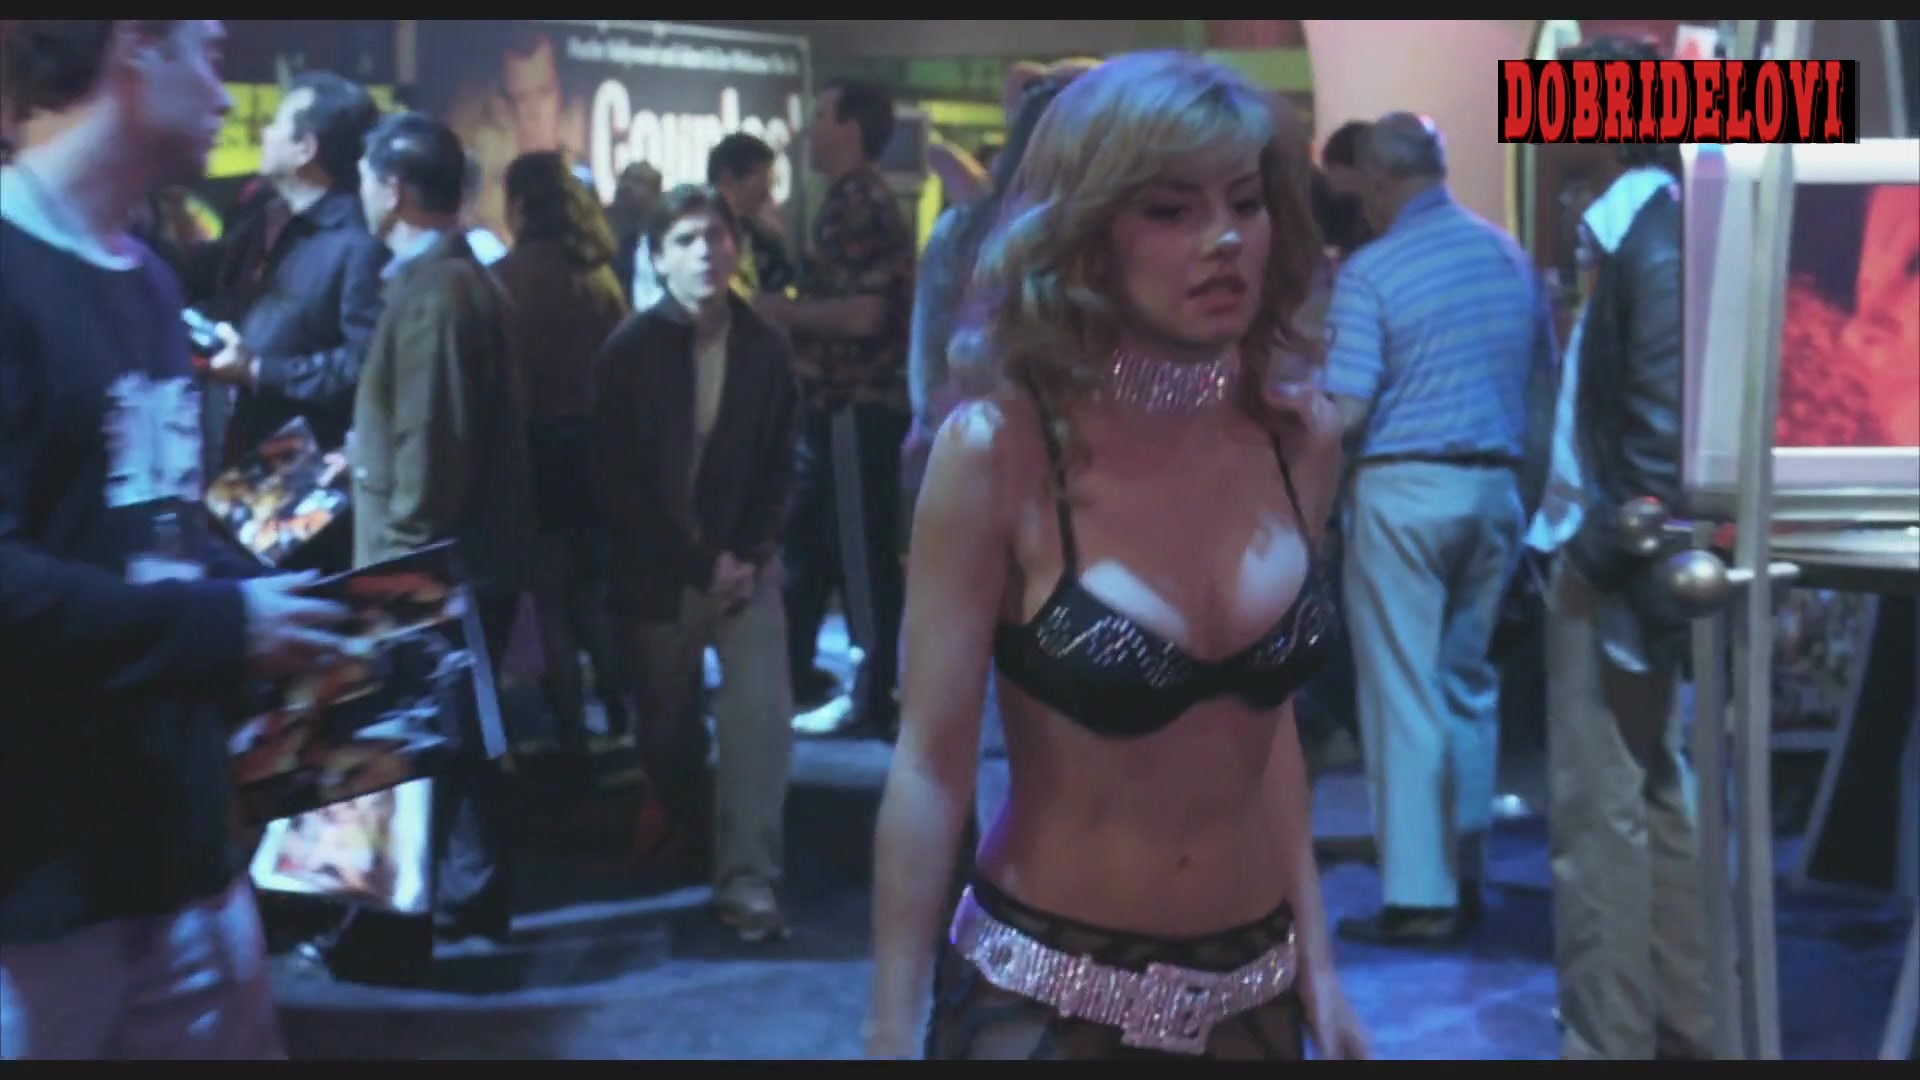 Elisha Cuthbert posing at porn convention scene from The Girl Next Door